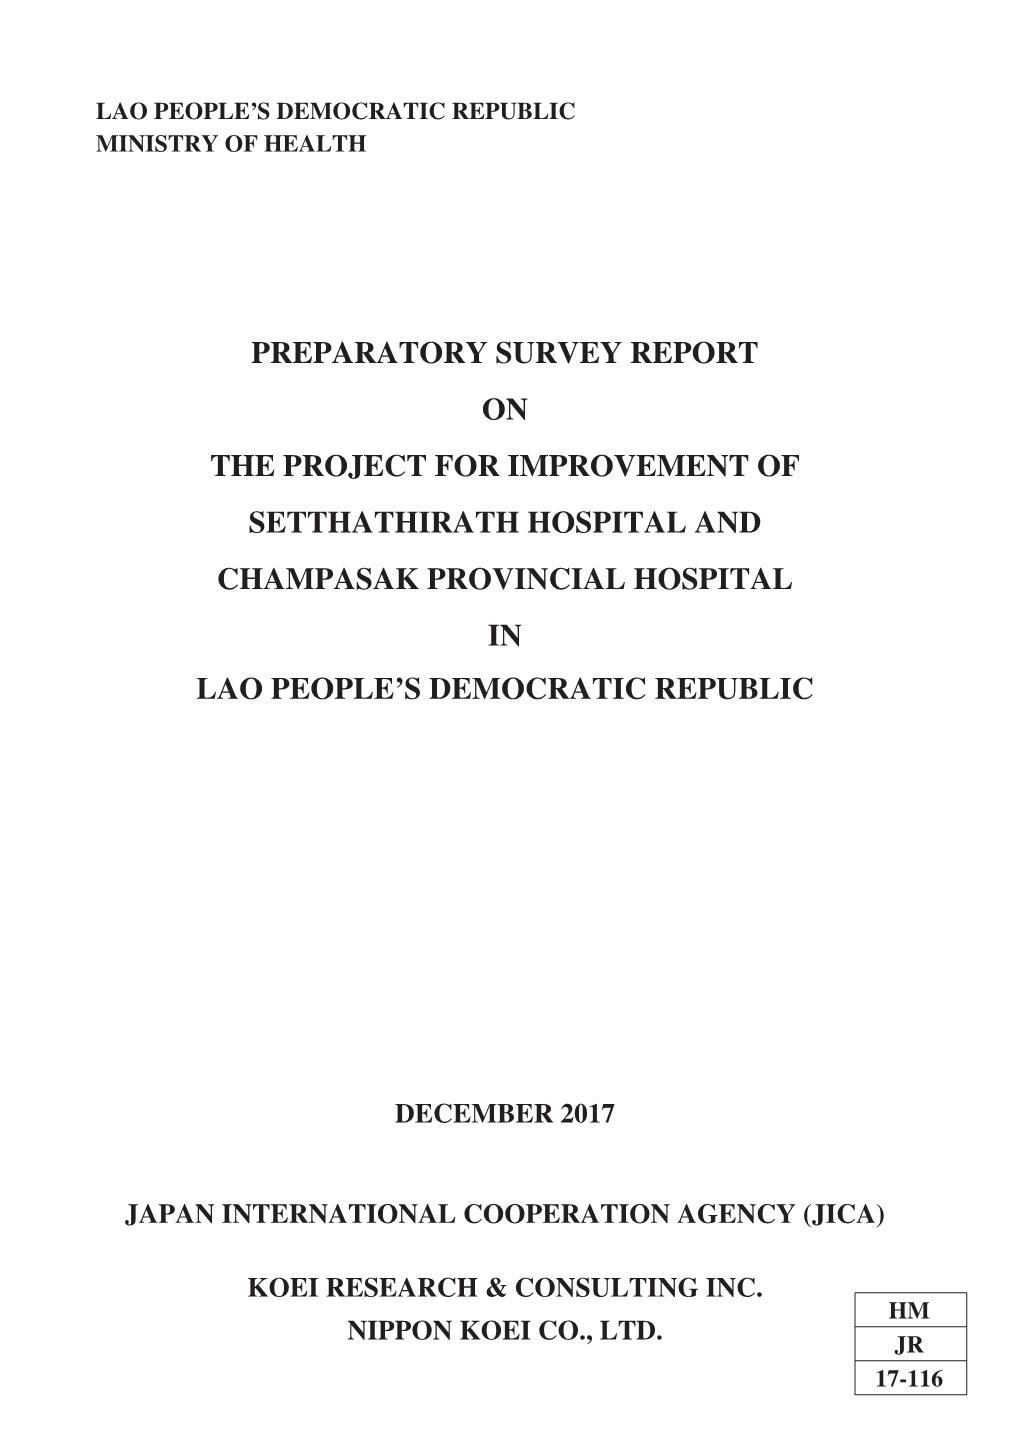 Preparatory Survey Report on the Project for Improvement of Setthathirath Hospital and Champasak Provincial Hospital in Lao People’S Democratic Republic